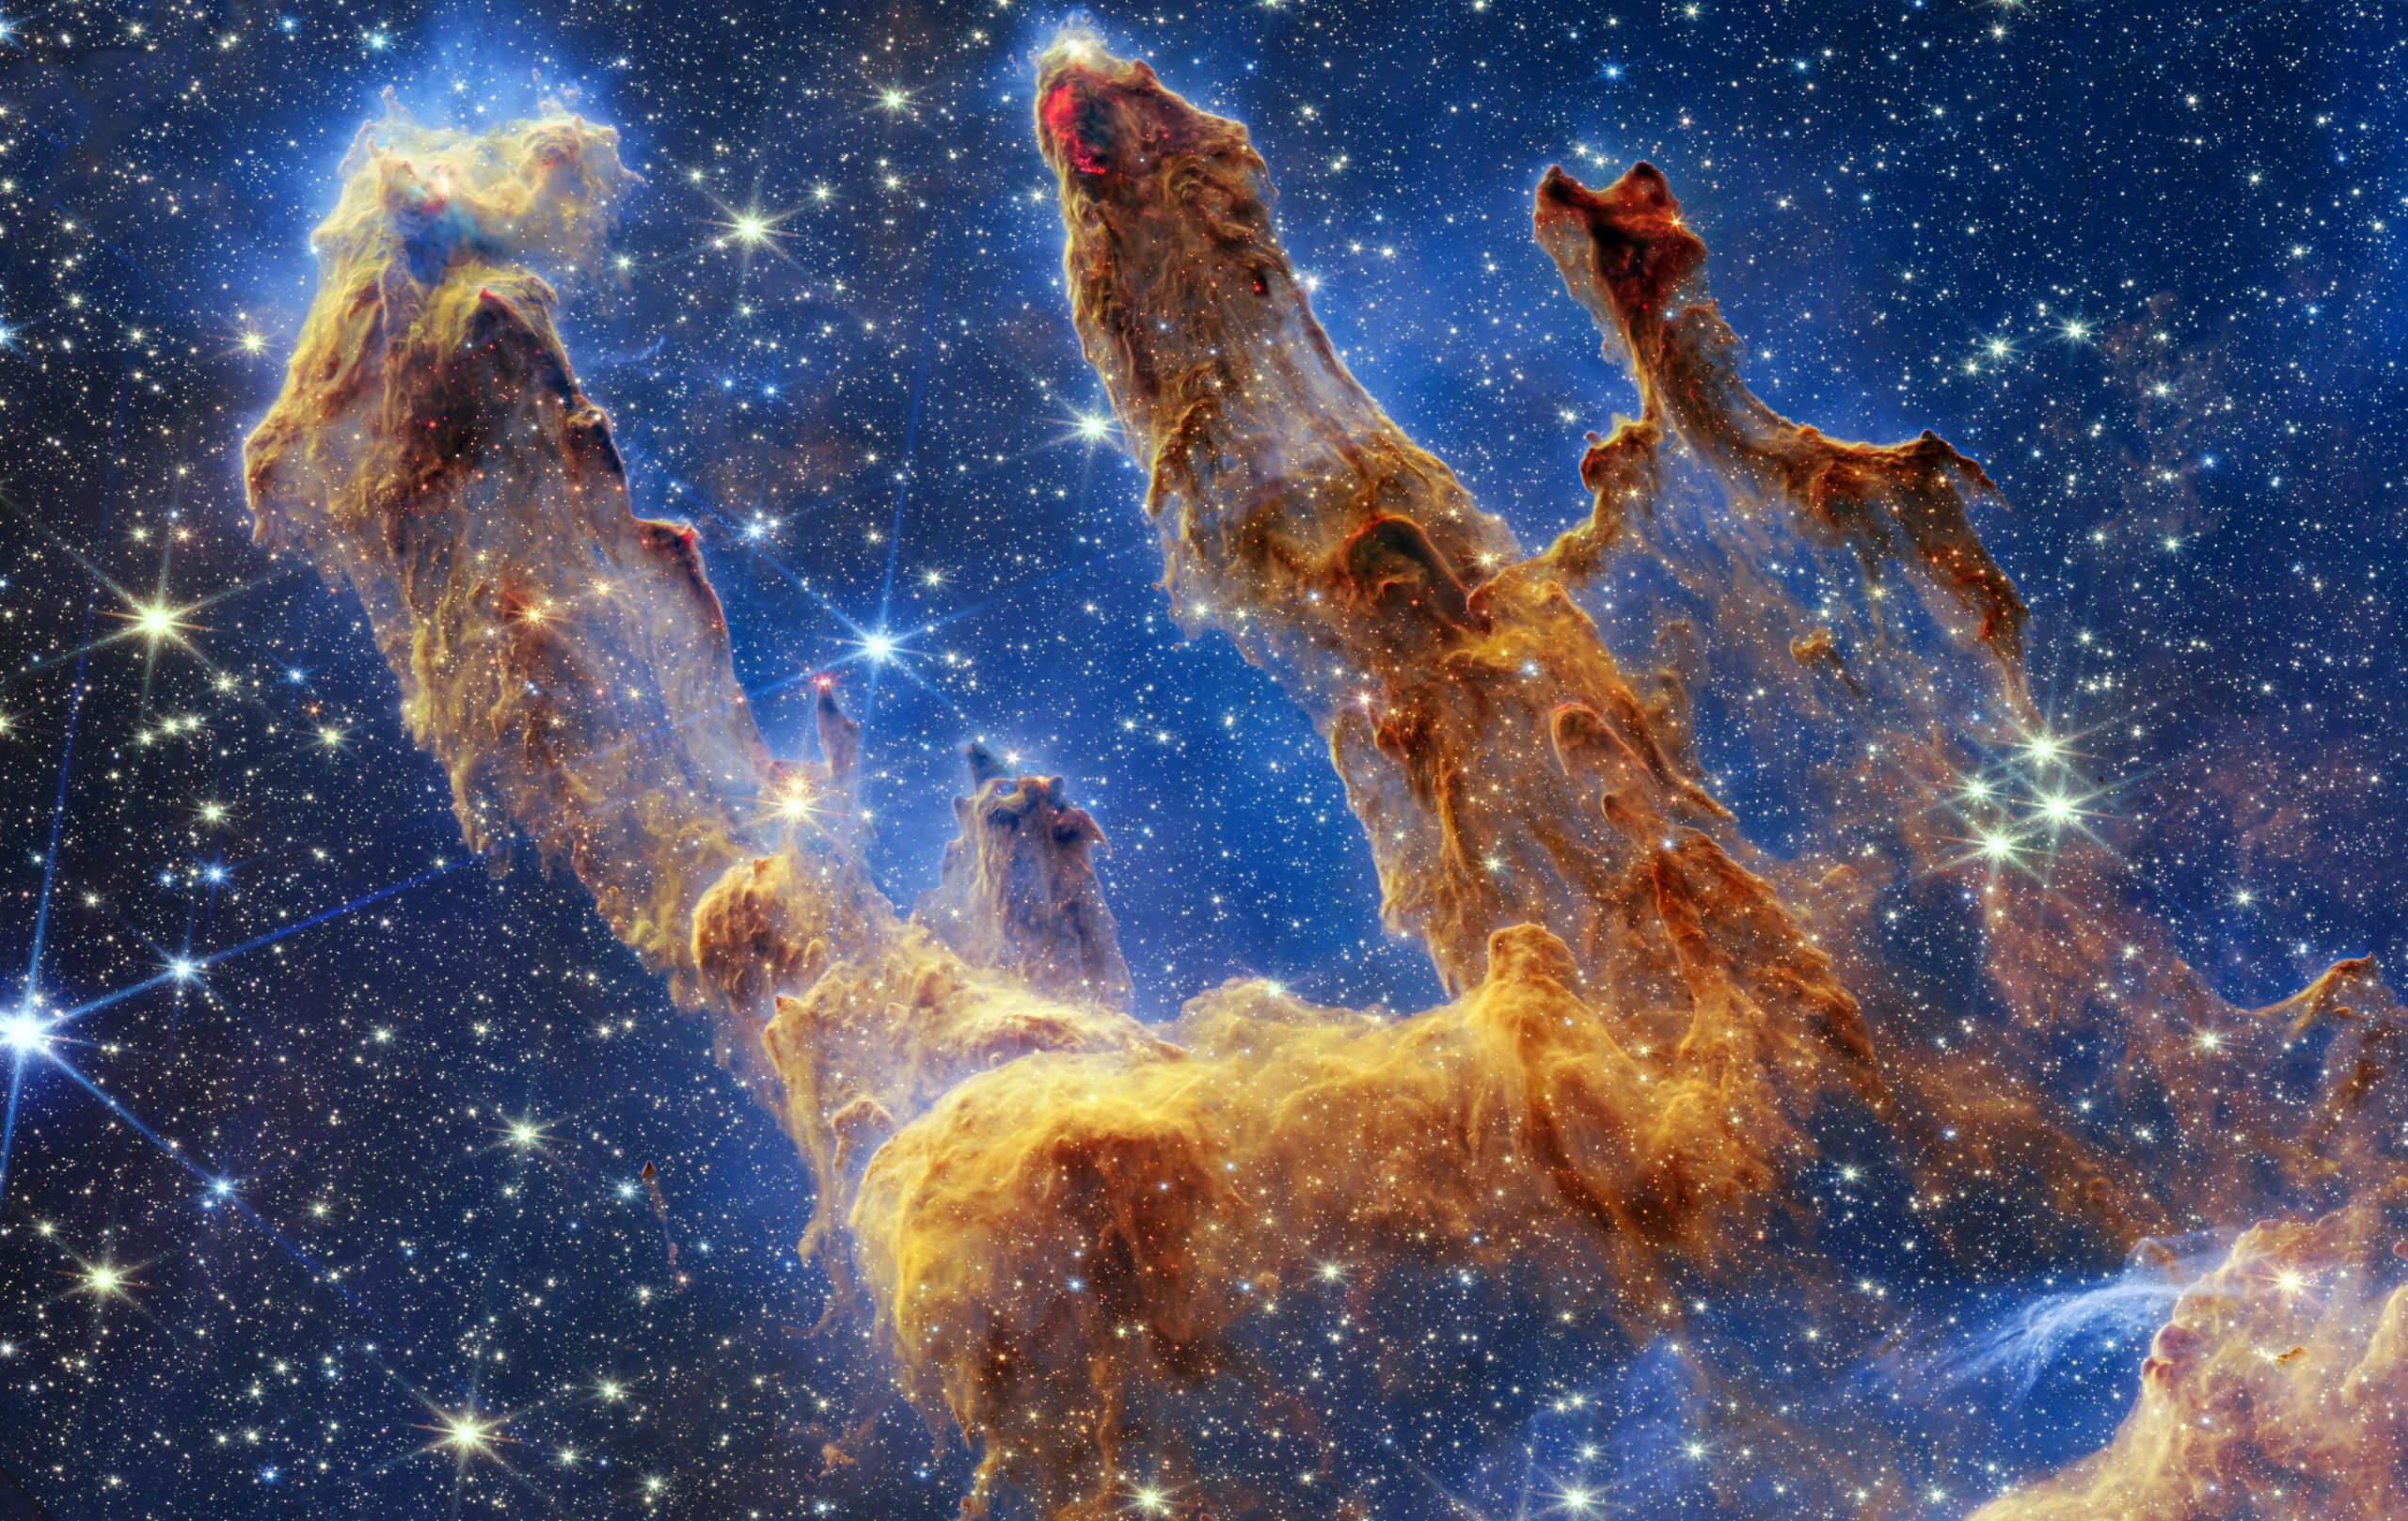 Webb Space Telescope’s Captures Incredible Star-Filled Portrait of Pillars of Creation – SciTechDaily